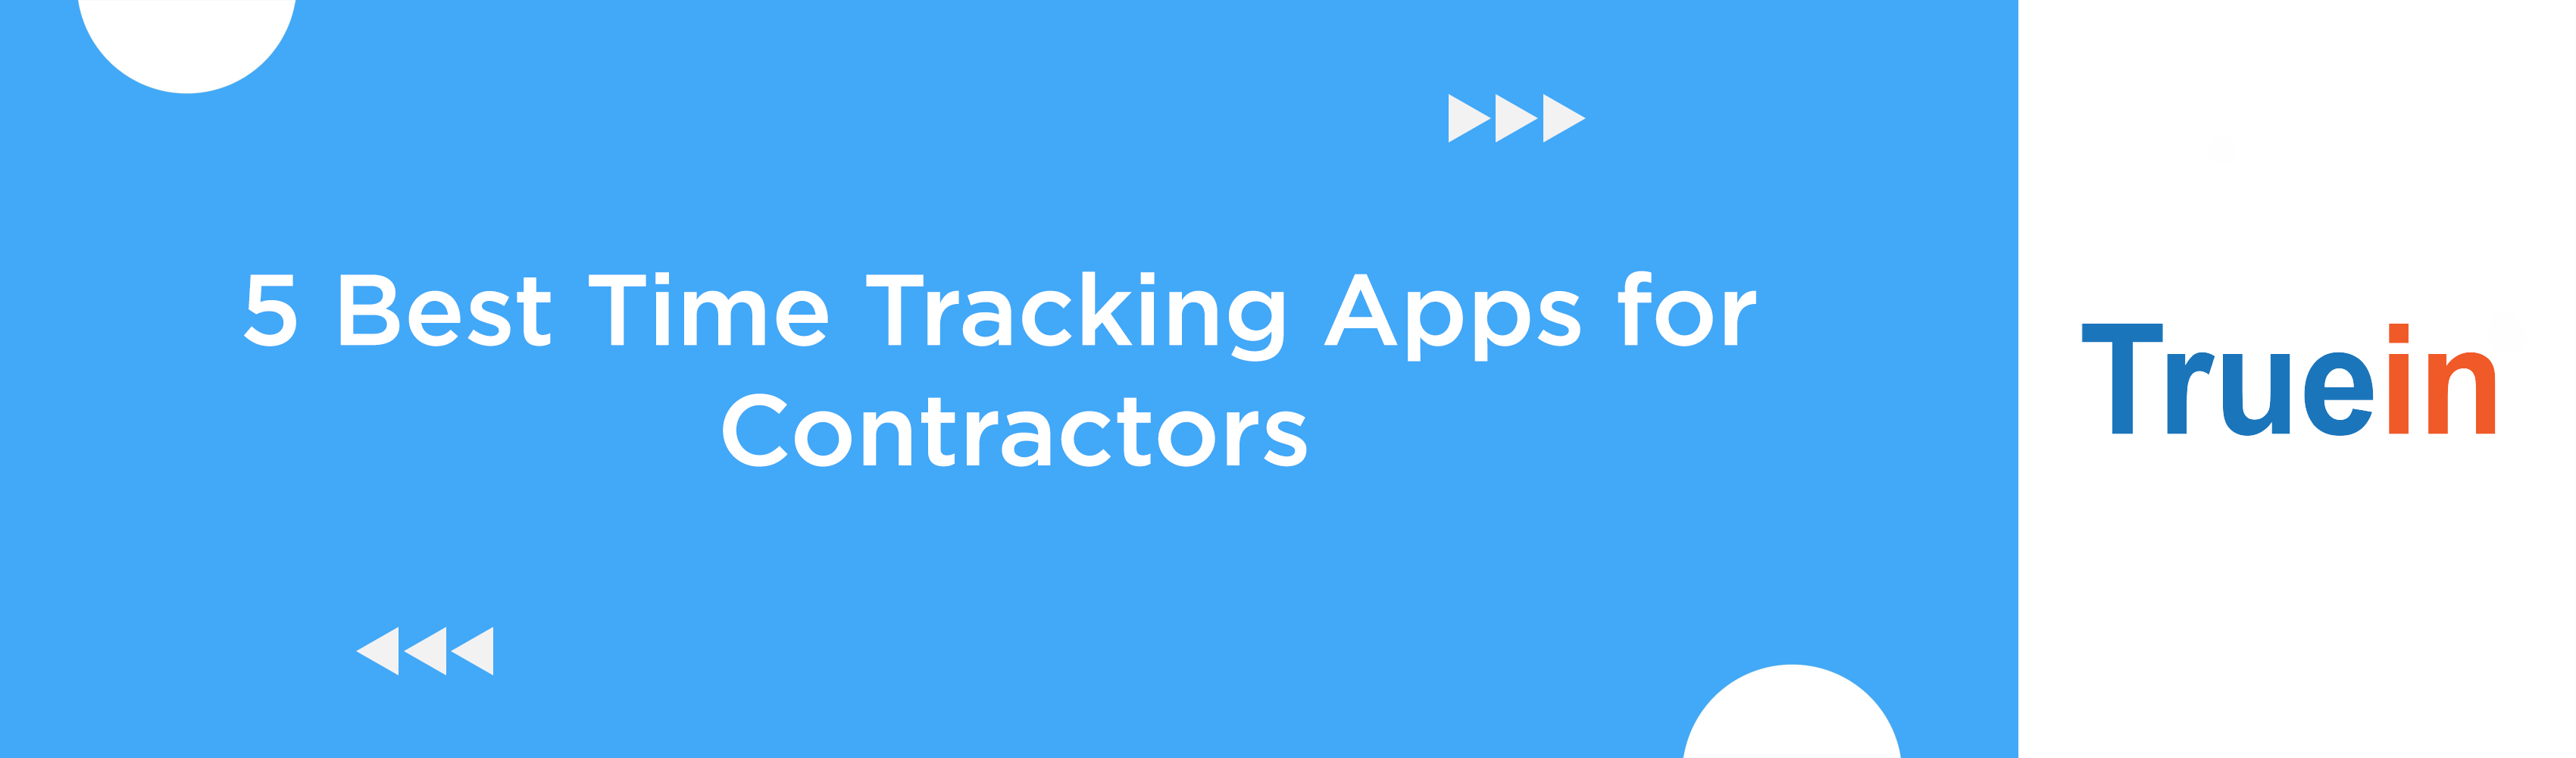 5 Best Time Tracking Apps for Contractors